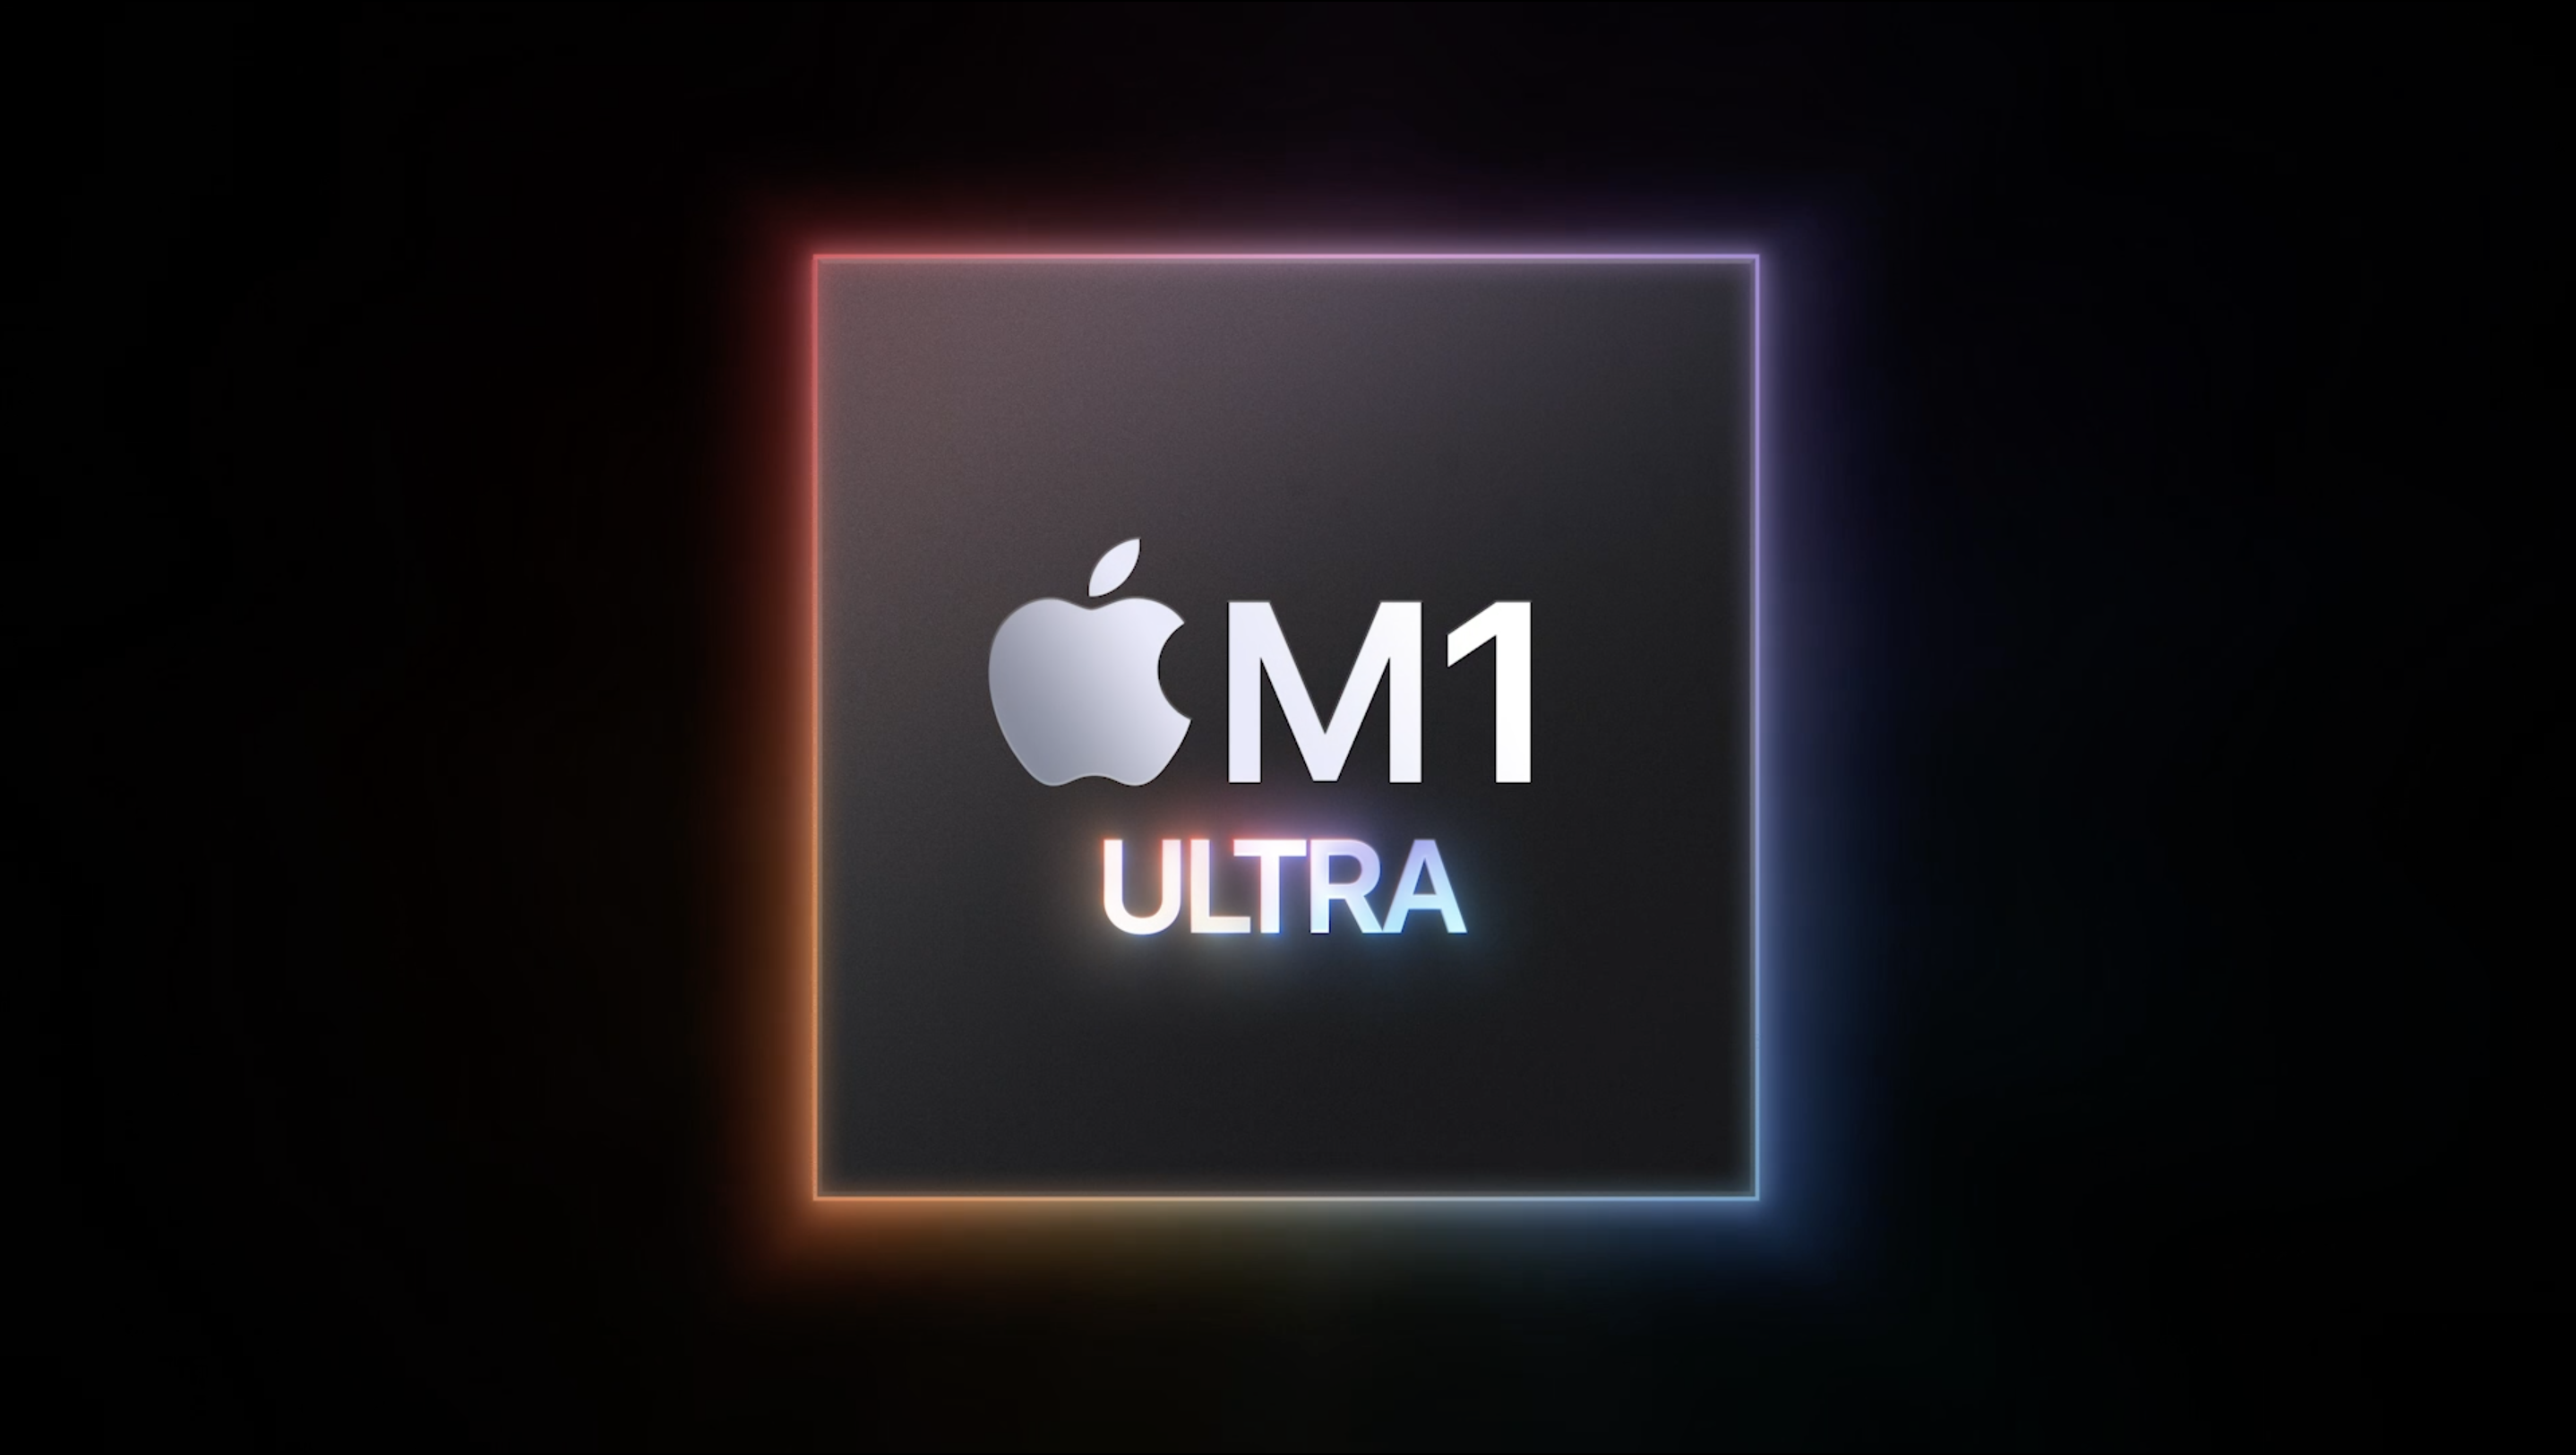 The Apple M1 Ultra chip